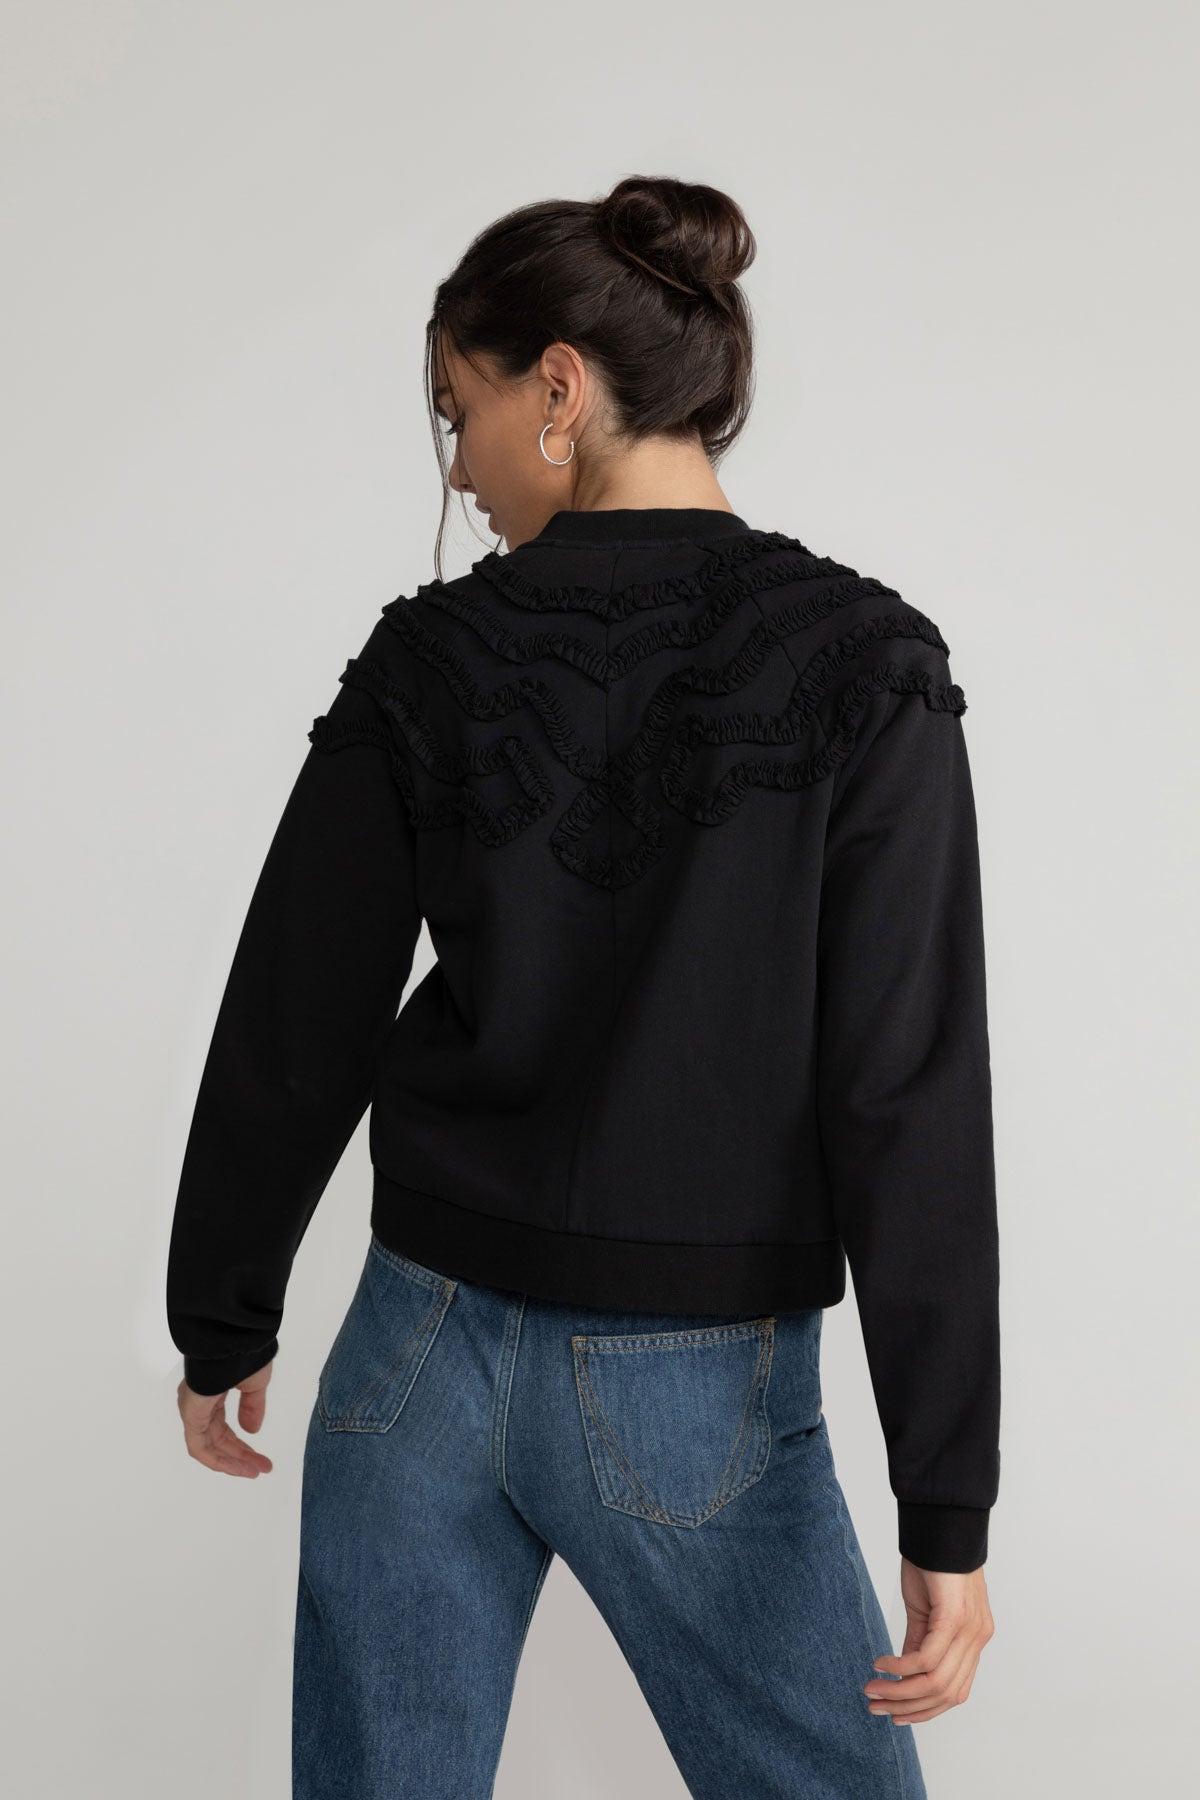 Endellion sweat bomber jacket in black from LOVJOI made of organic cotton